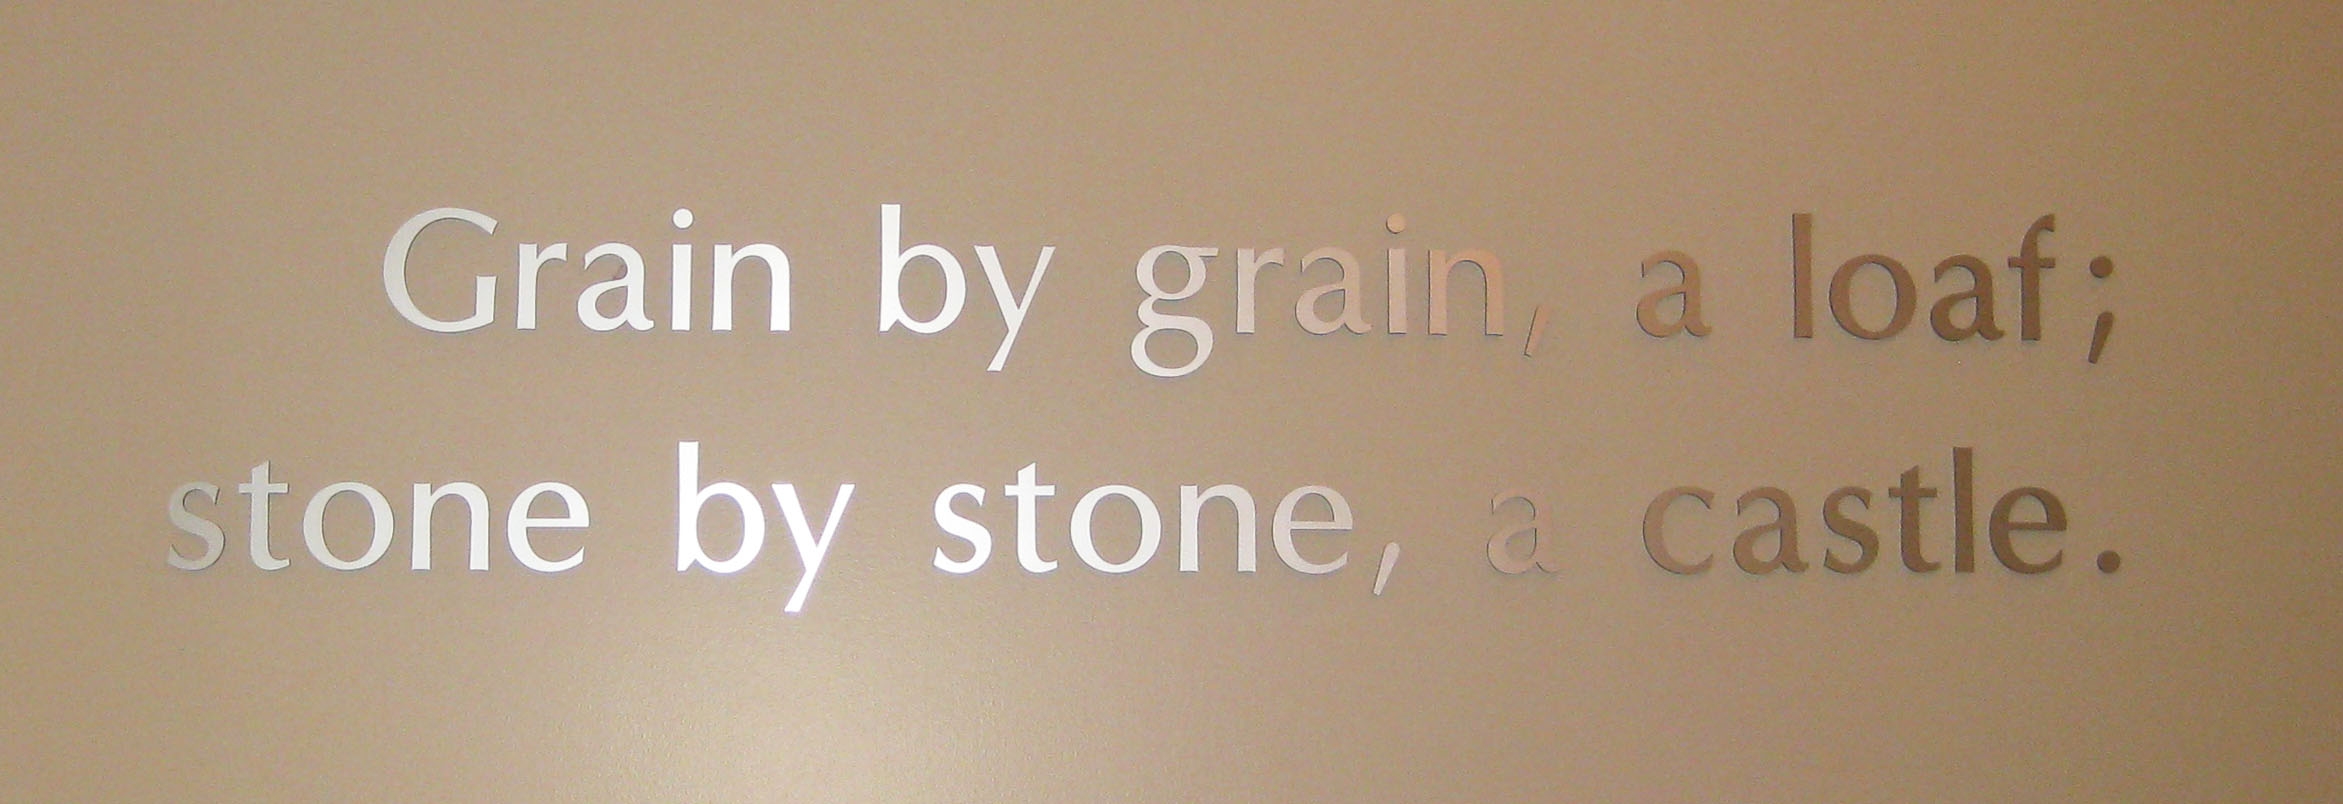 Food Bank Quotes. QuotesGram2343 x 804